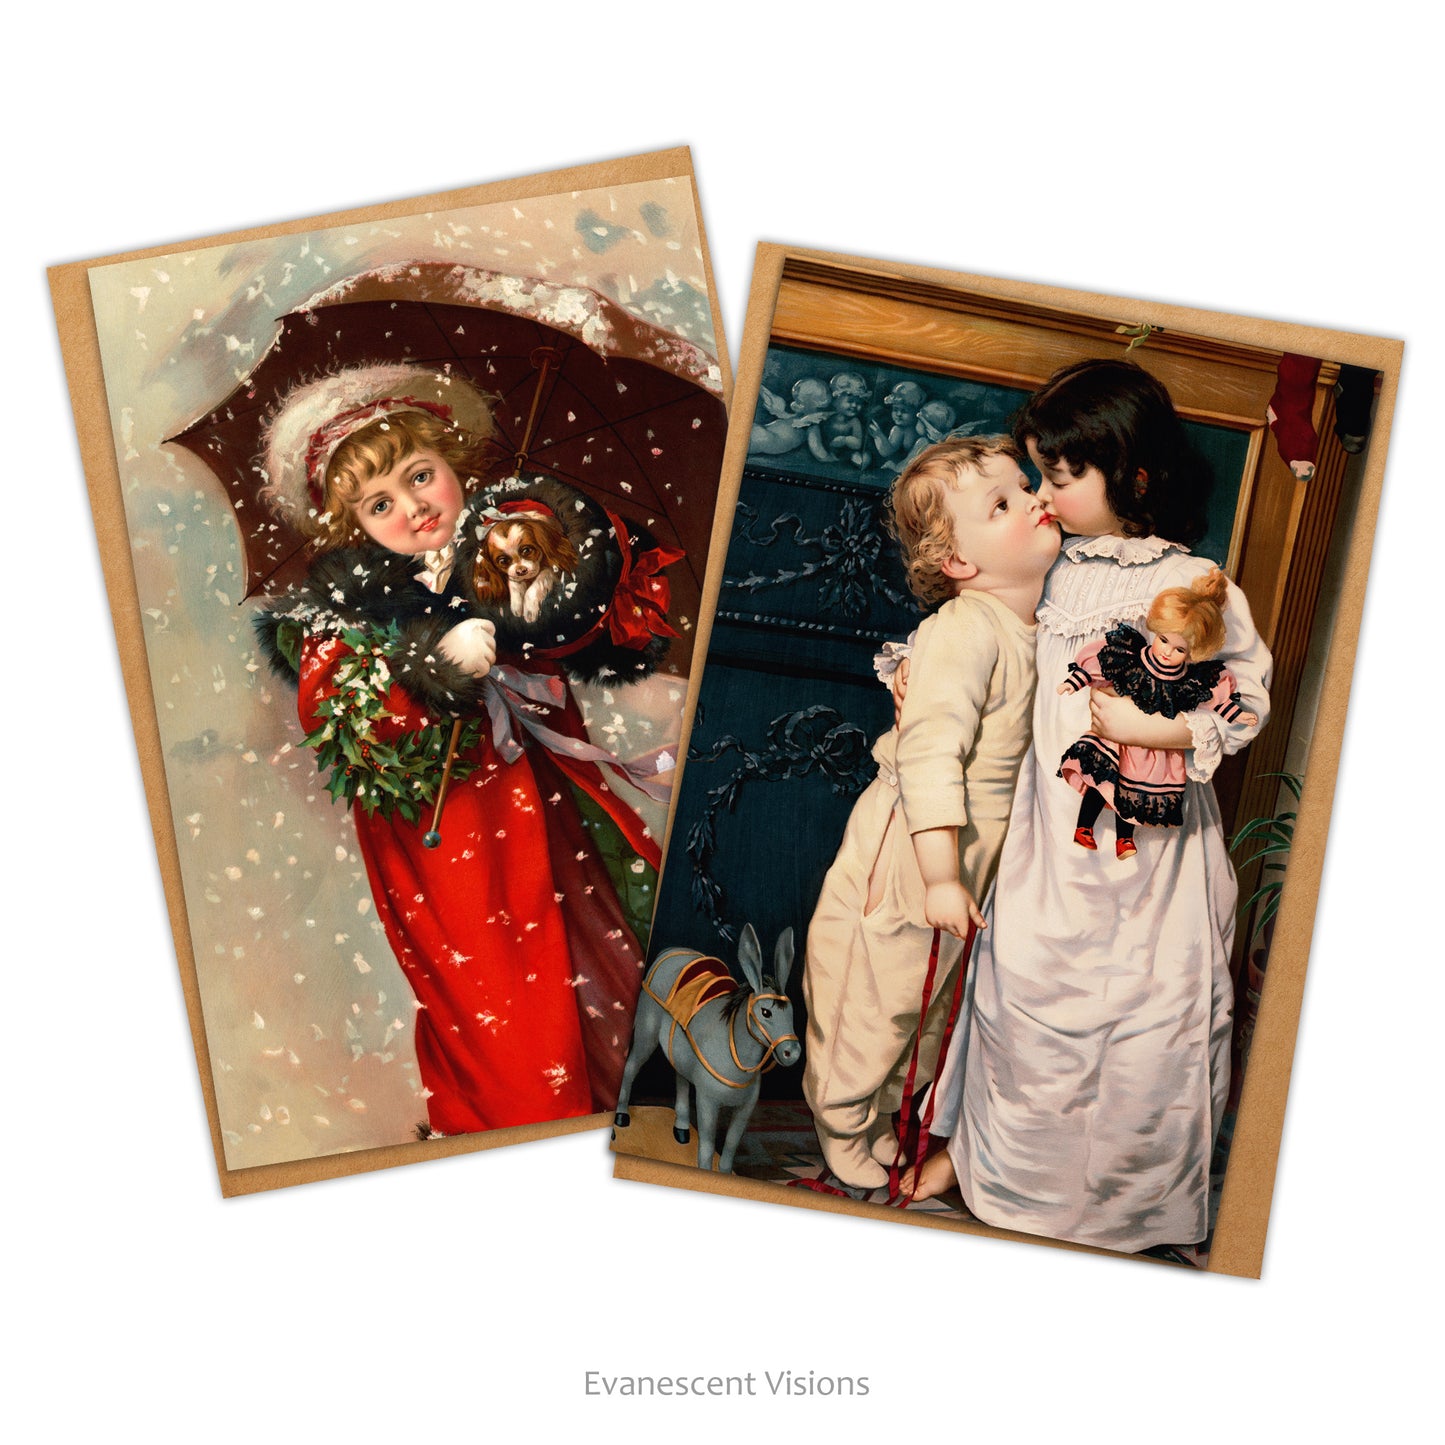 Two vintage Xmas Cards featuring cute children in Christmas-themed scenes.